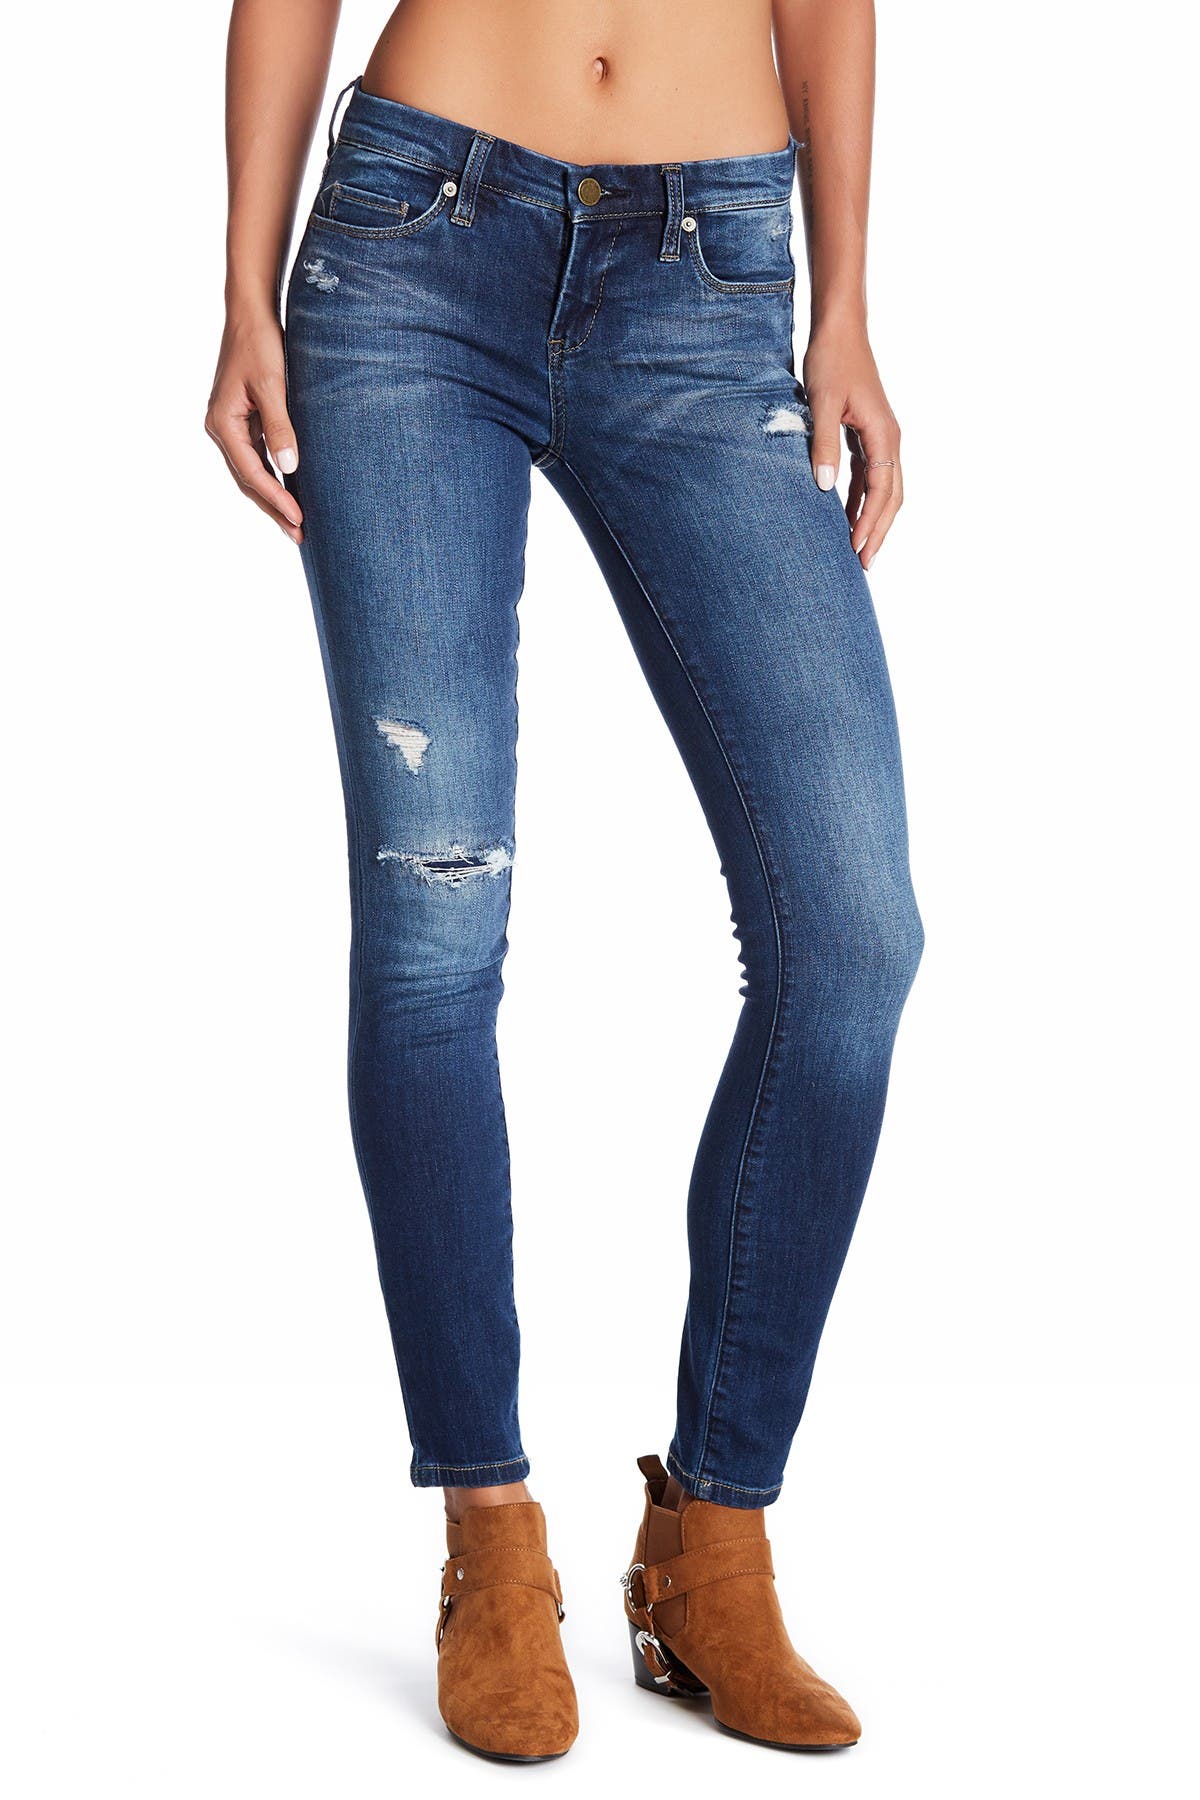 m and s travel jeans